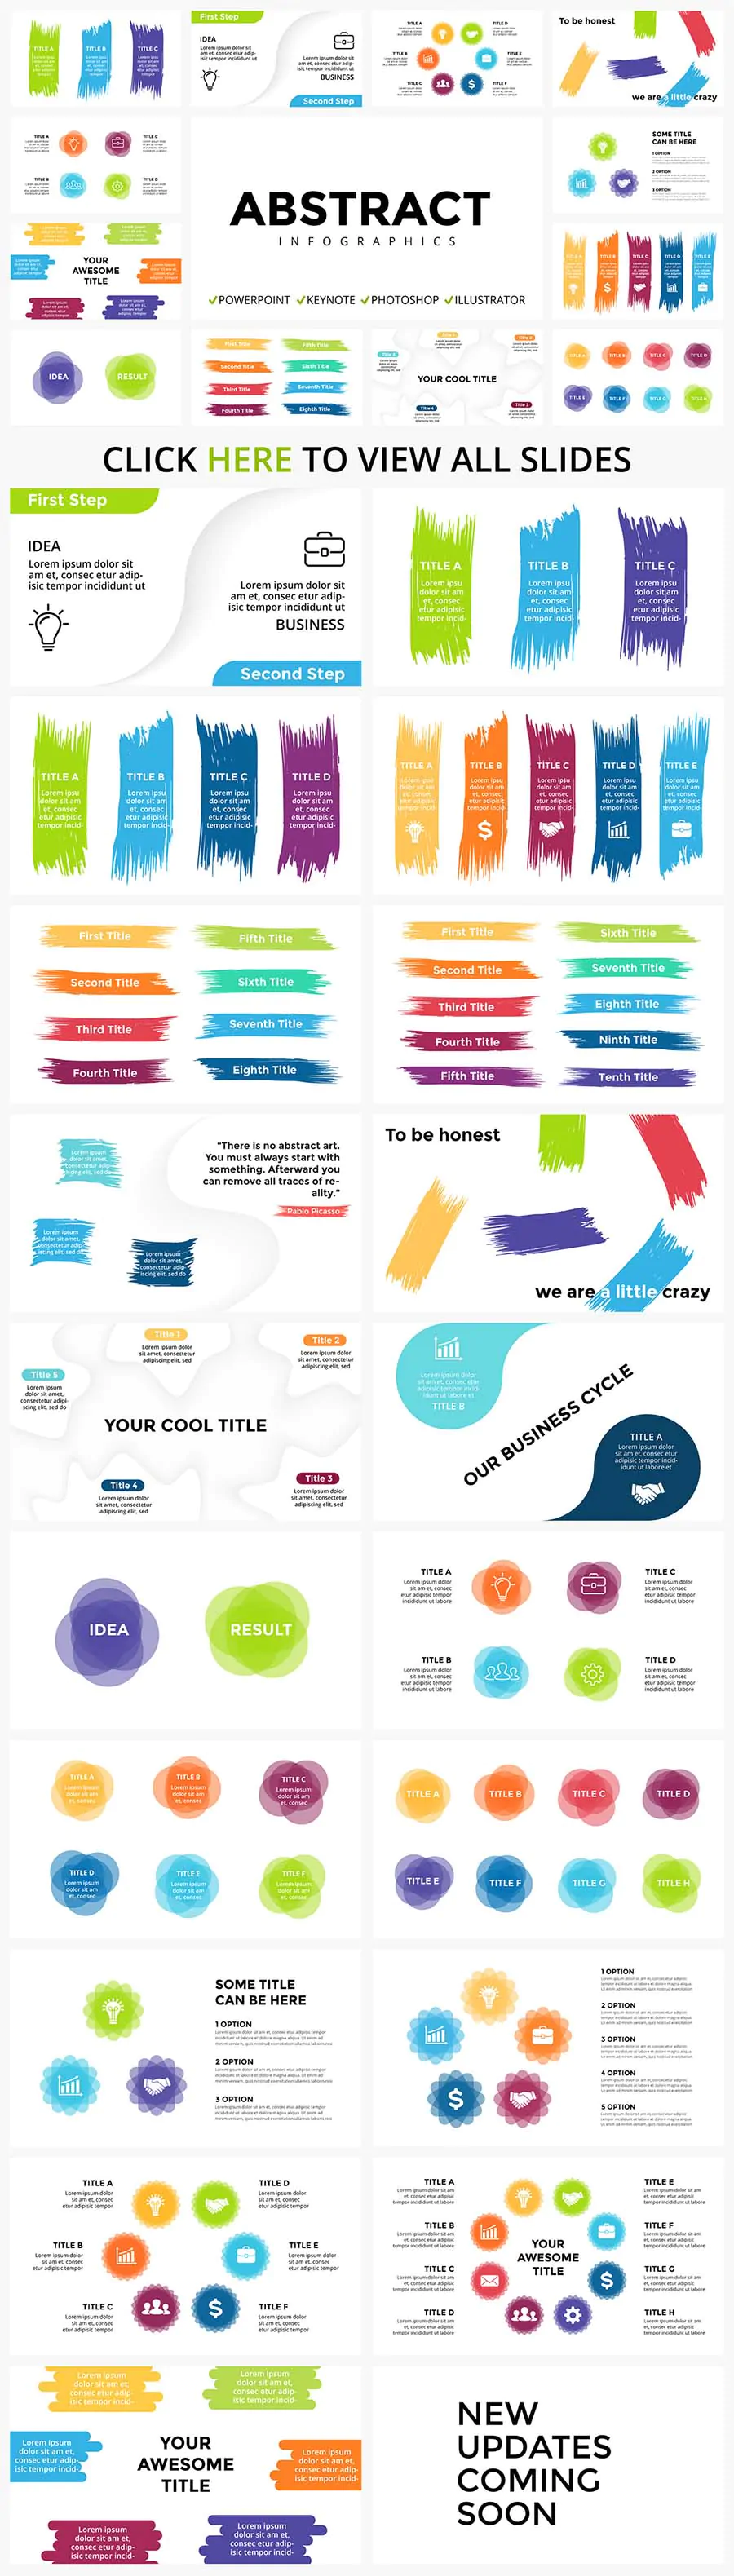 Abstract Infographic Templates - $5 ONLY